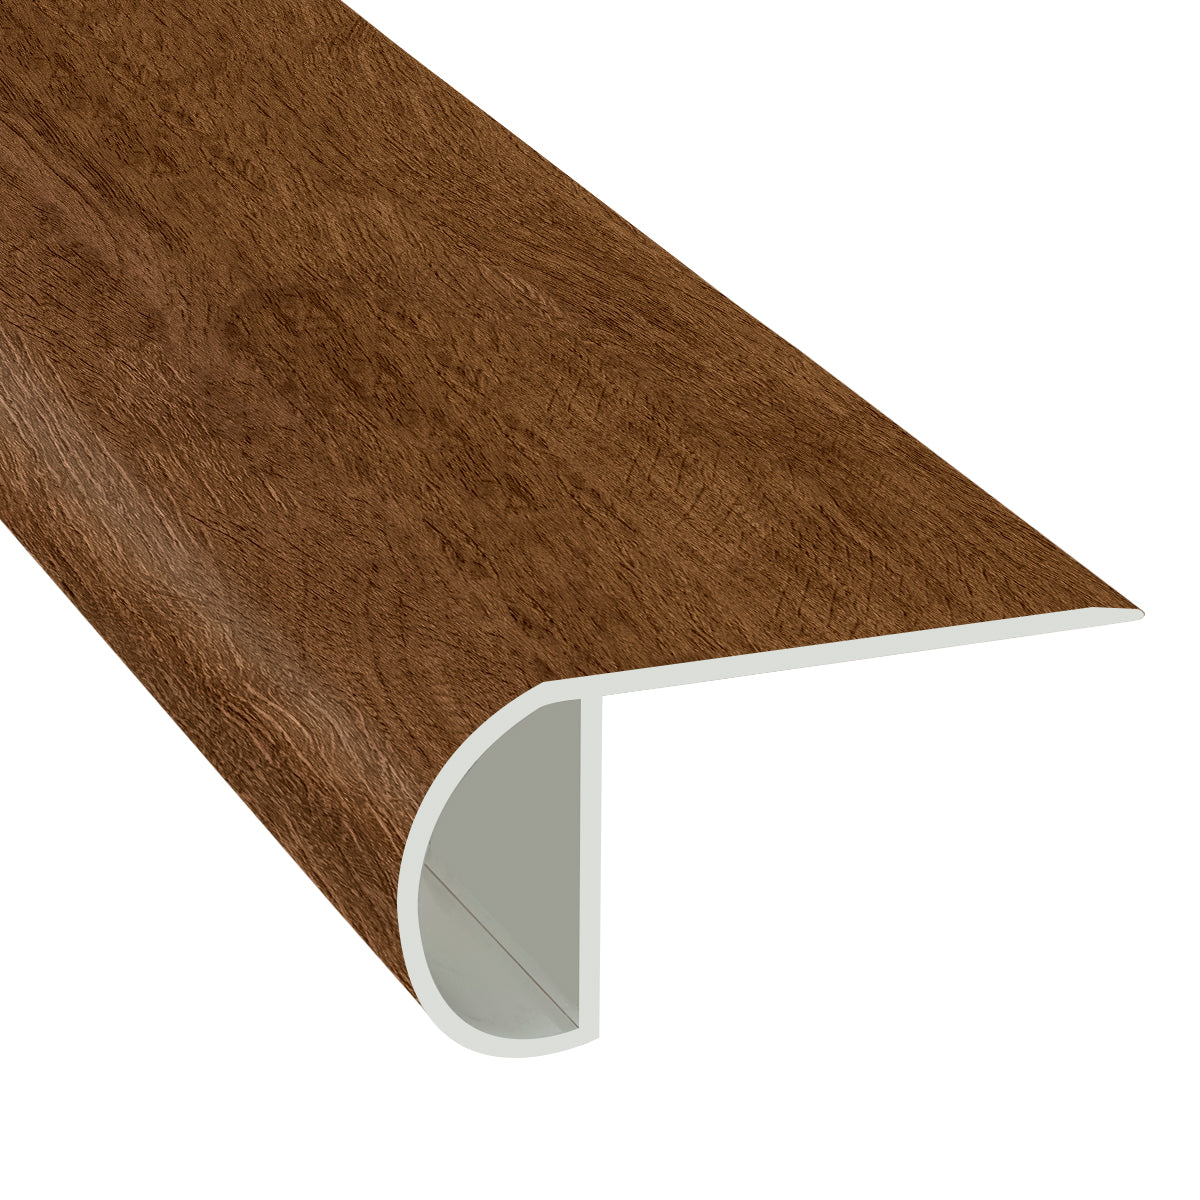 Montgomery 1.03 in. Thick x 2.23 in. Width x 94 in. Length Overlap Vinyl Stair Nose